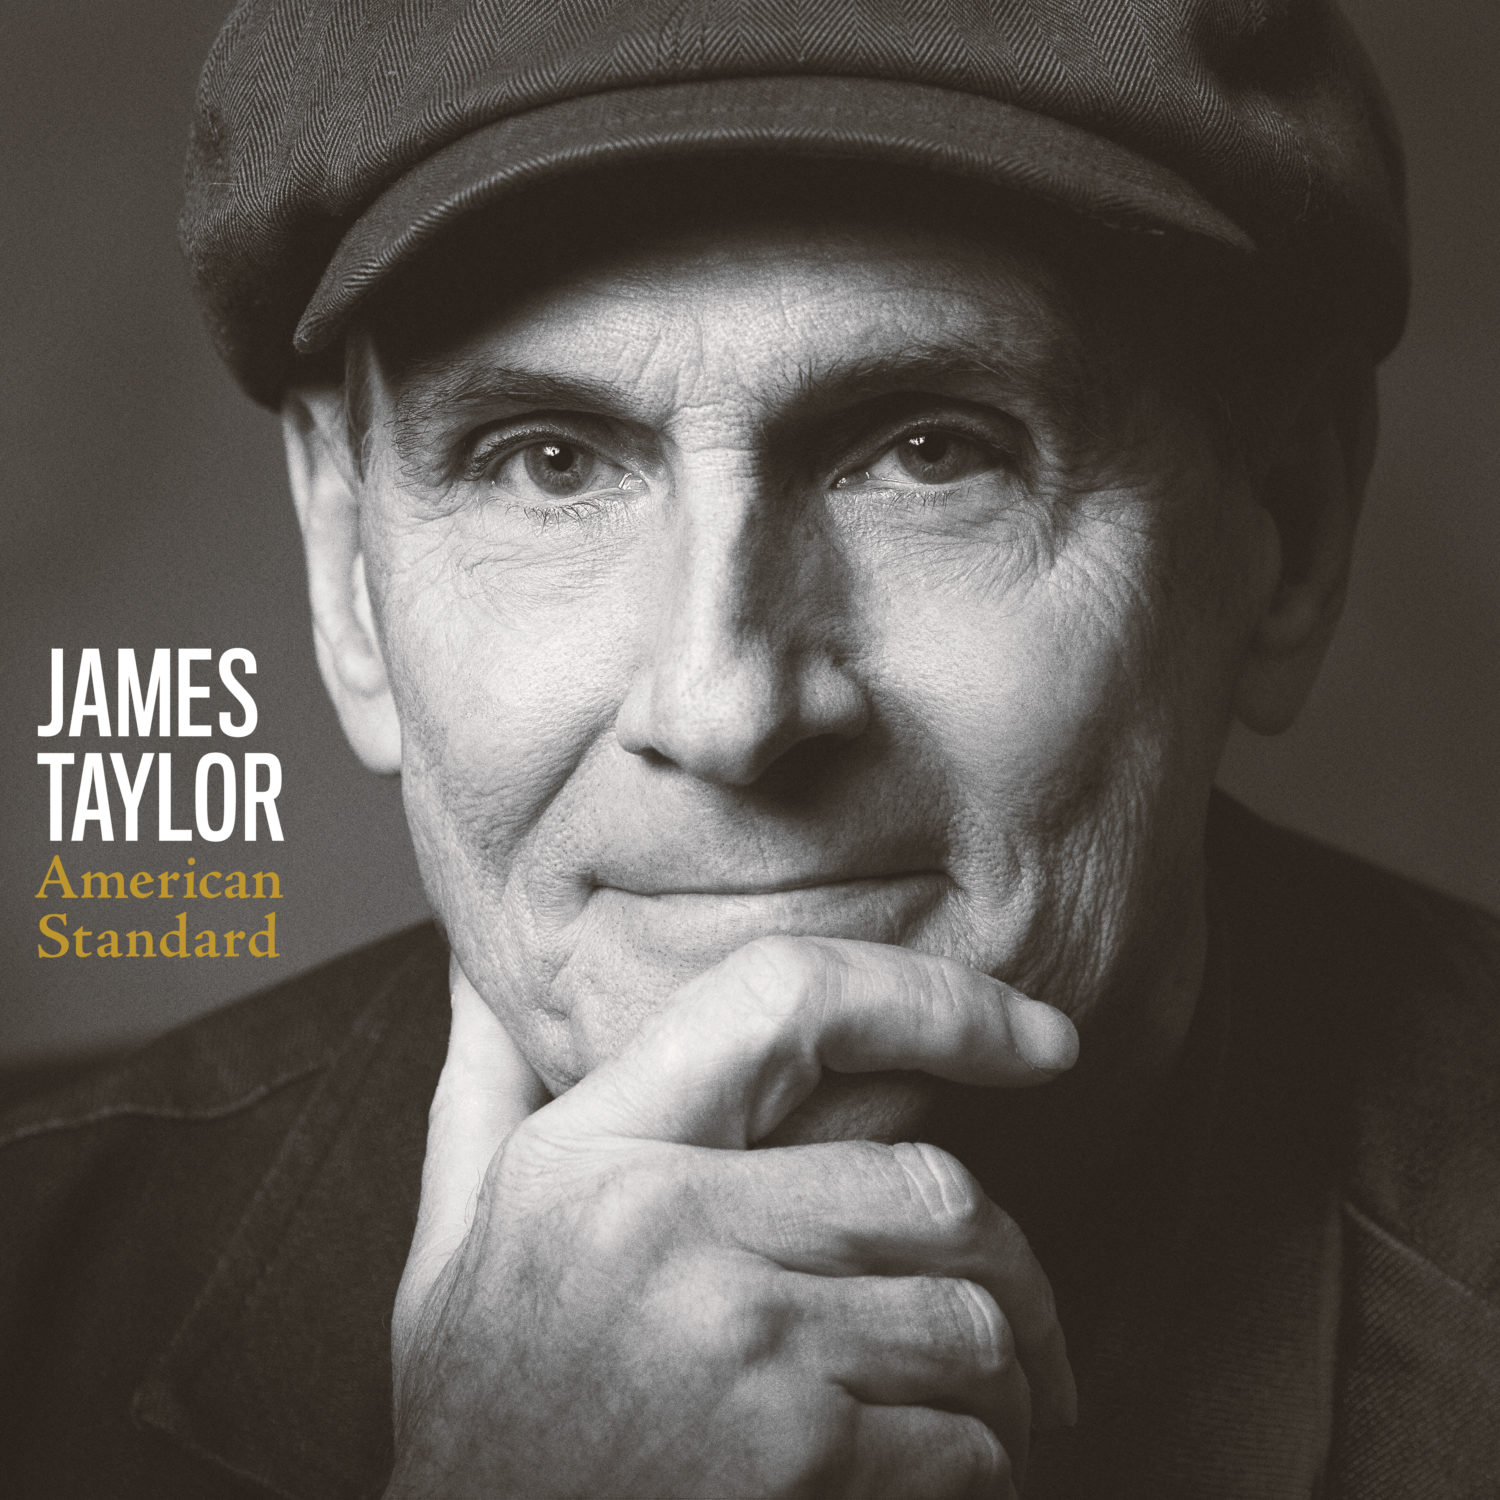 JAMES TAYLOR SHARES MUSIC VIDEO FOR 